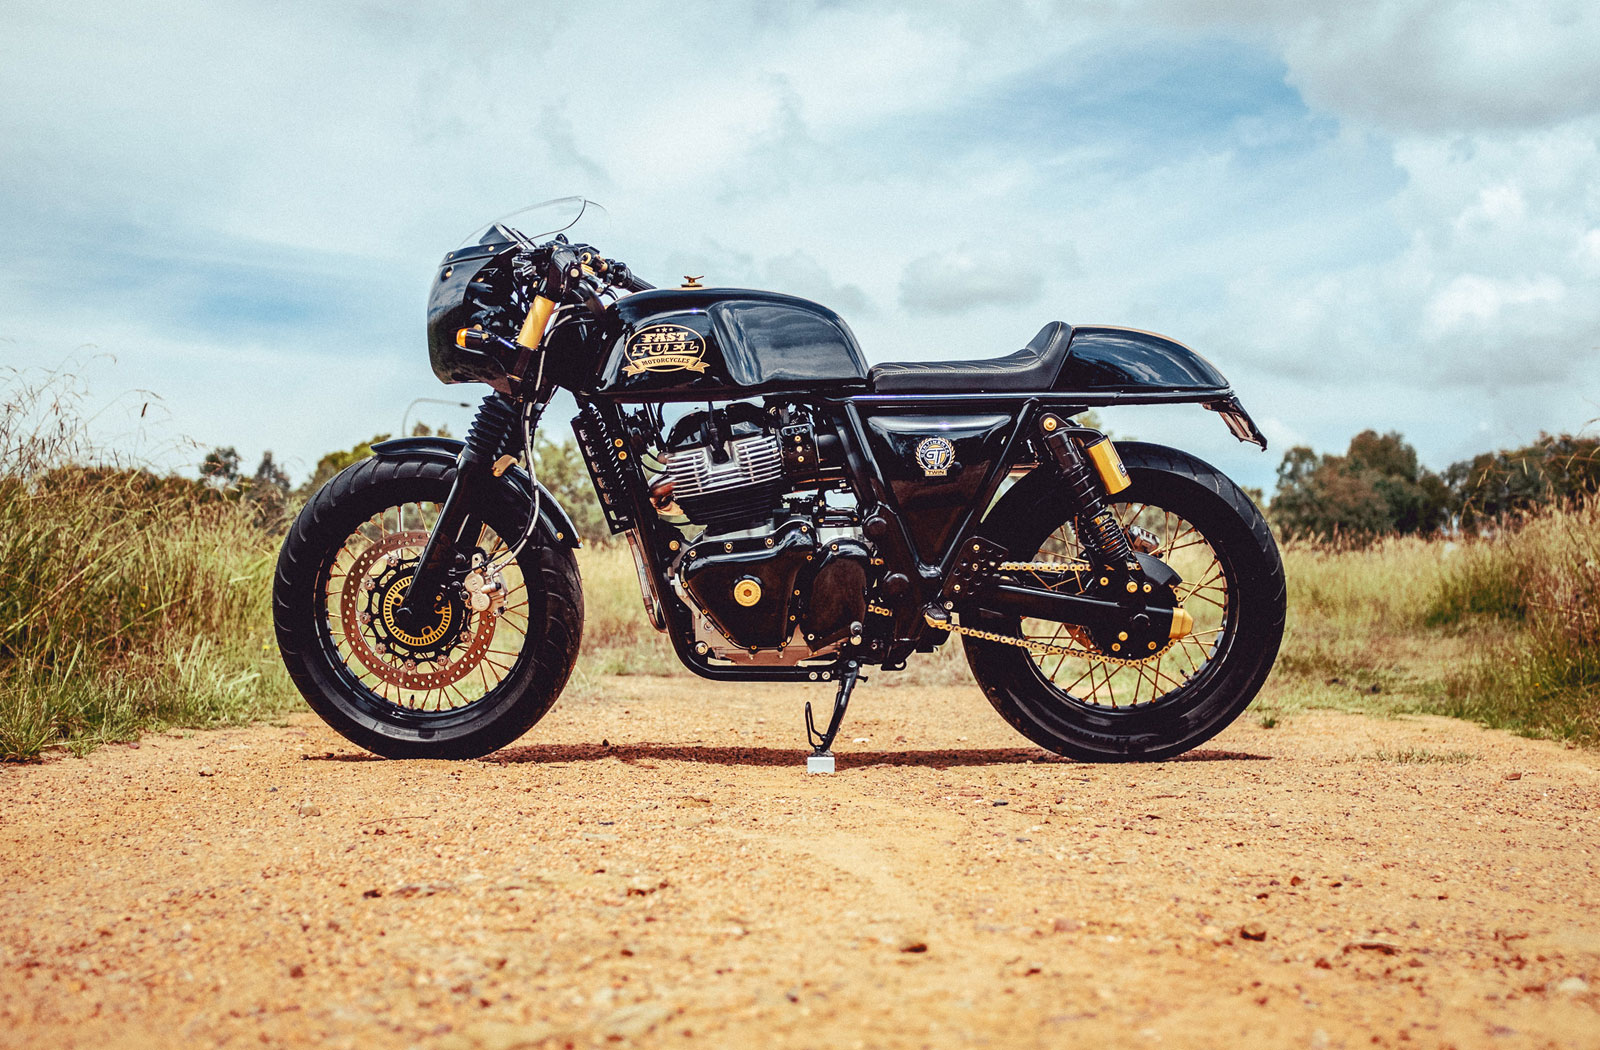 Fast Fuel Motorcycles GT650 Cafe Racer